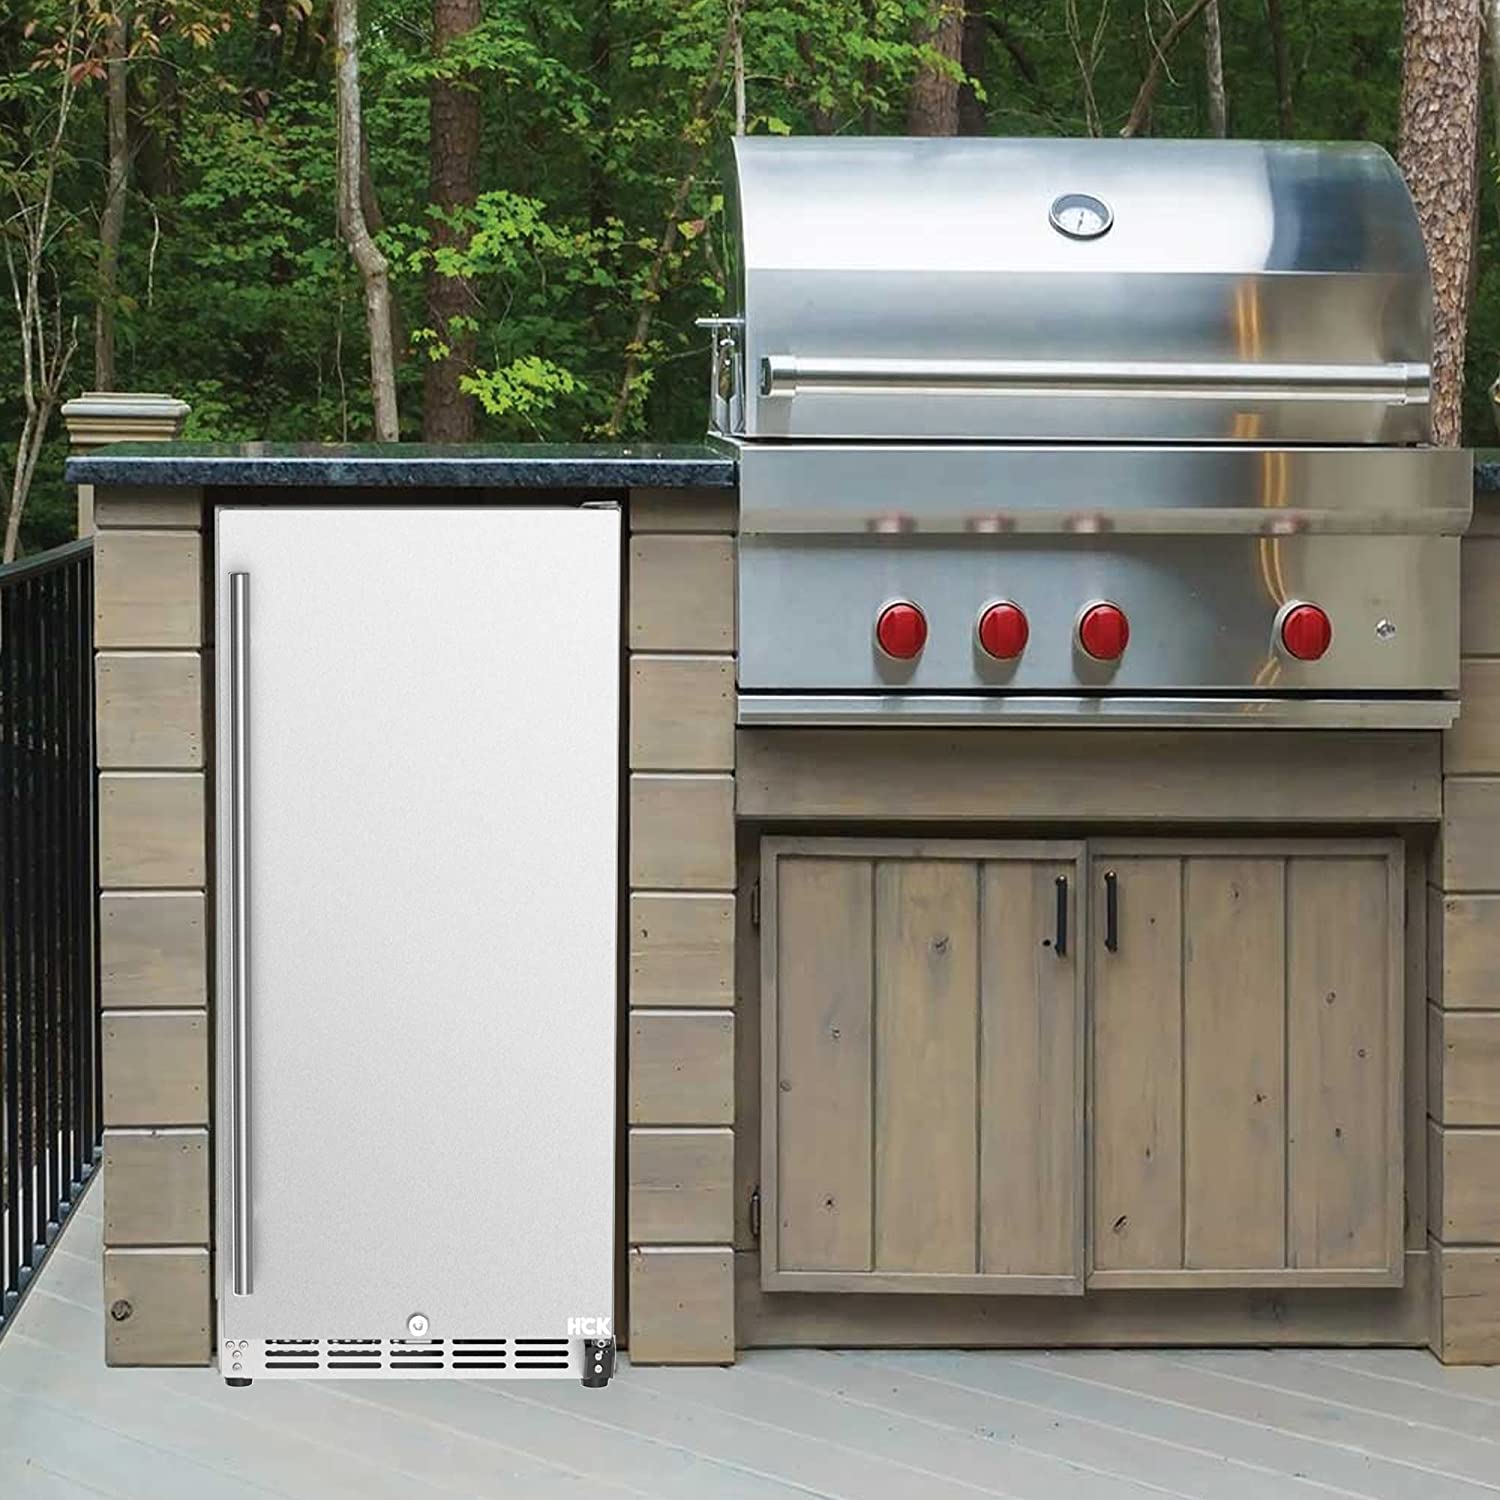 Front view of an outdoor barbecue setting with a 3.2 Cu Ft Black Outdoor Beverage Fridge 96 cans installed beside a barbecue grill